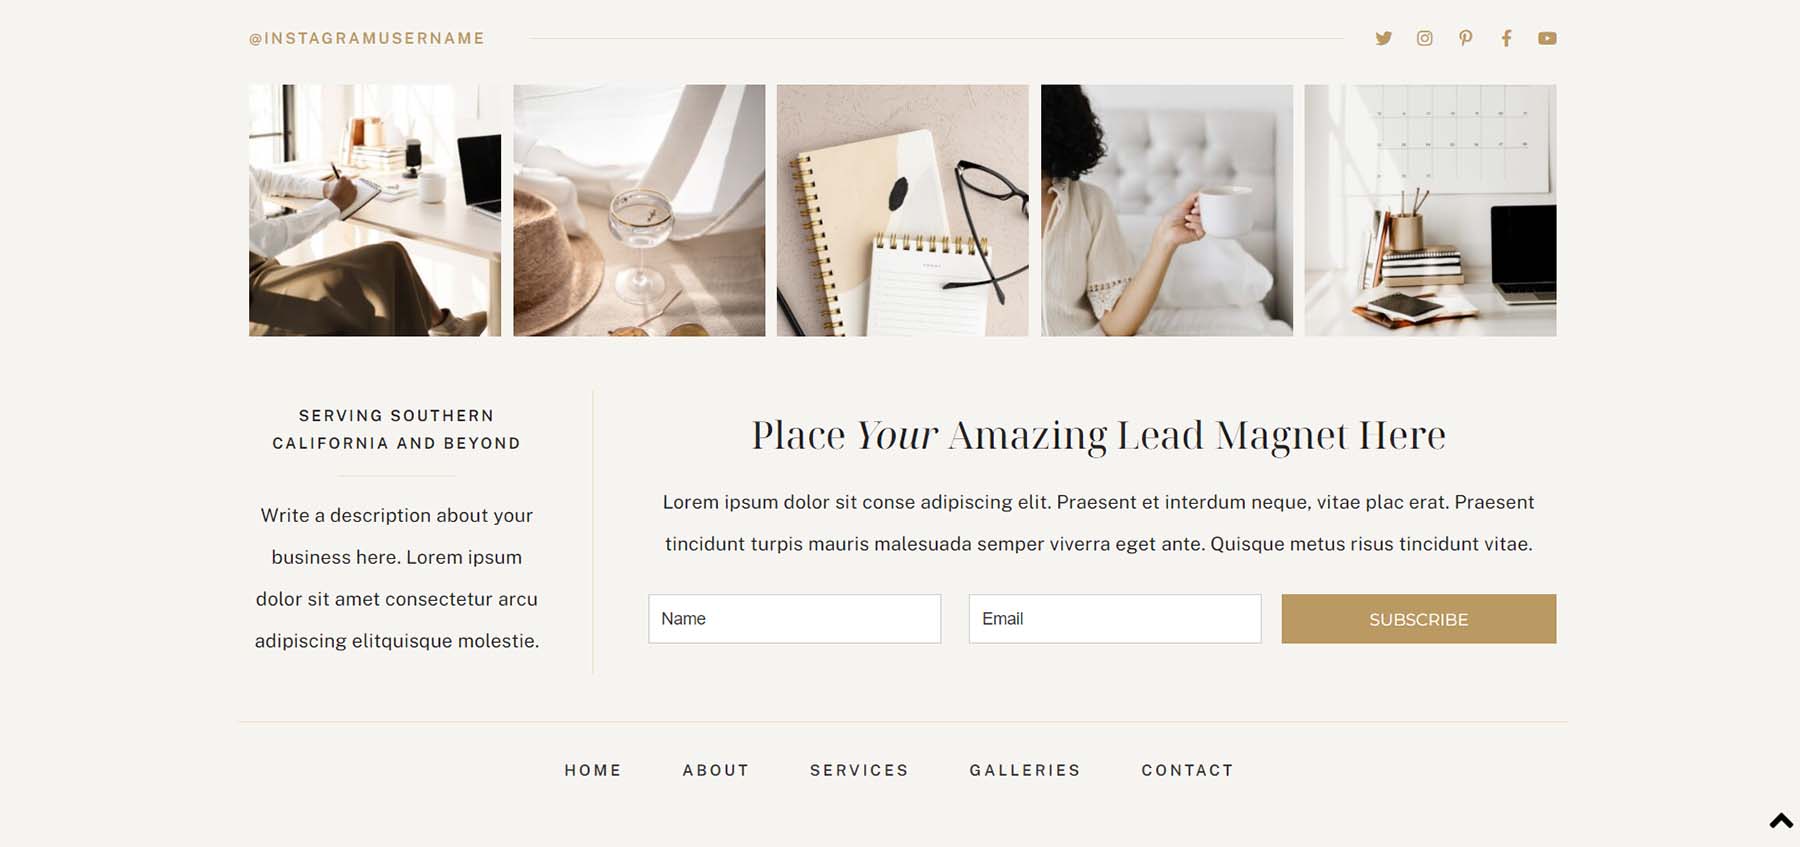 Native Instagram and Newsletter modules in the ChicLuxe theme